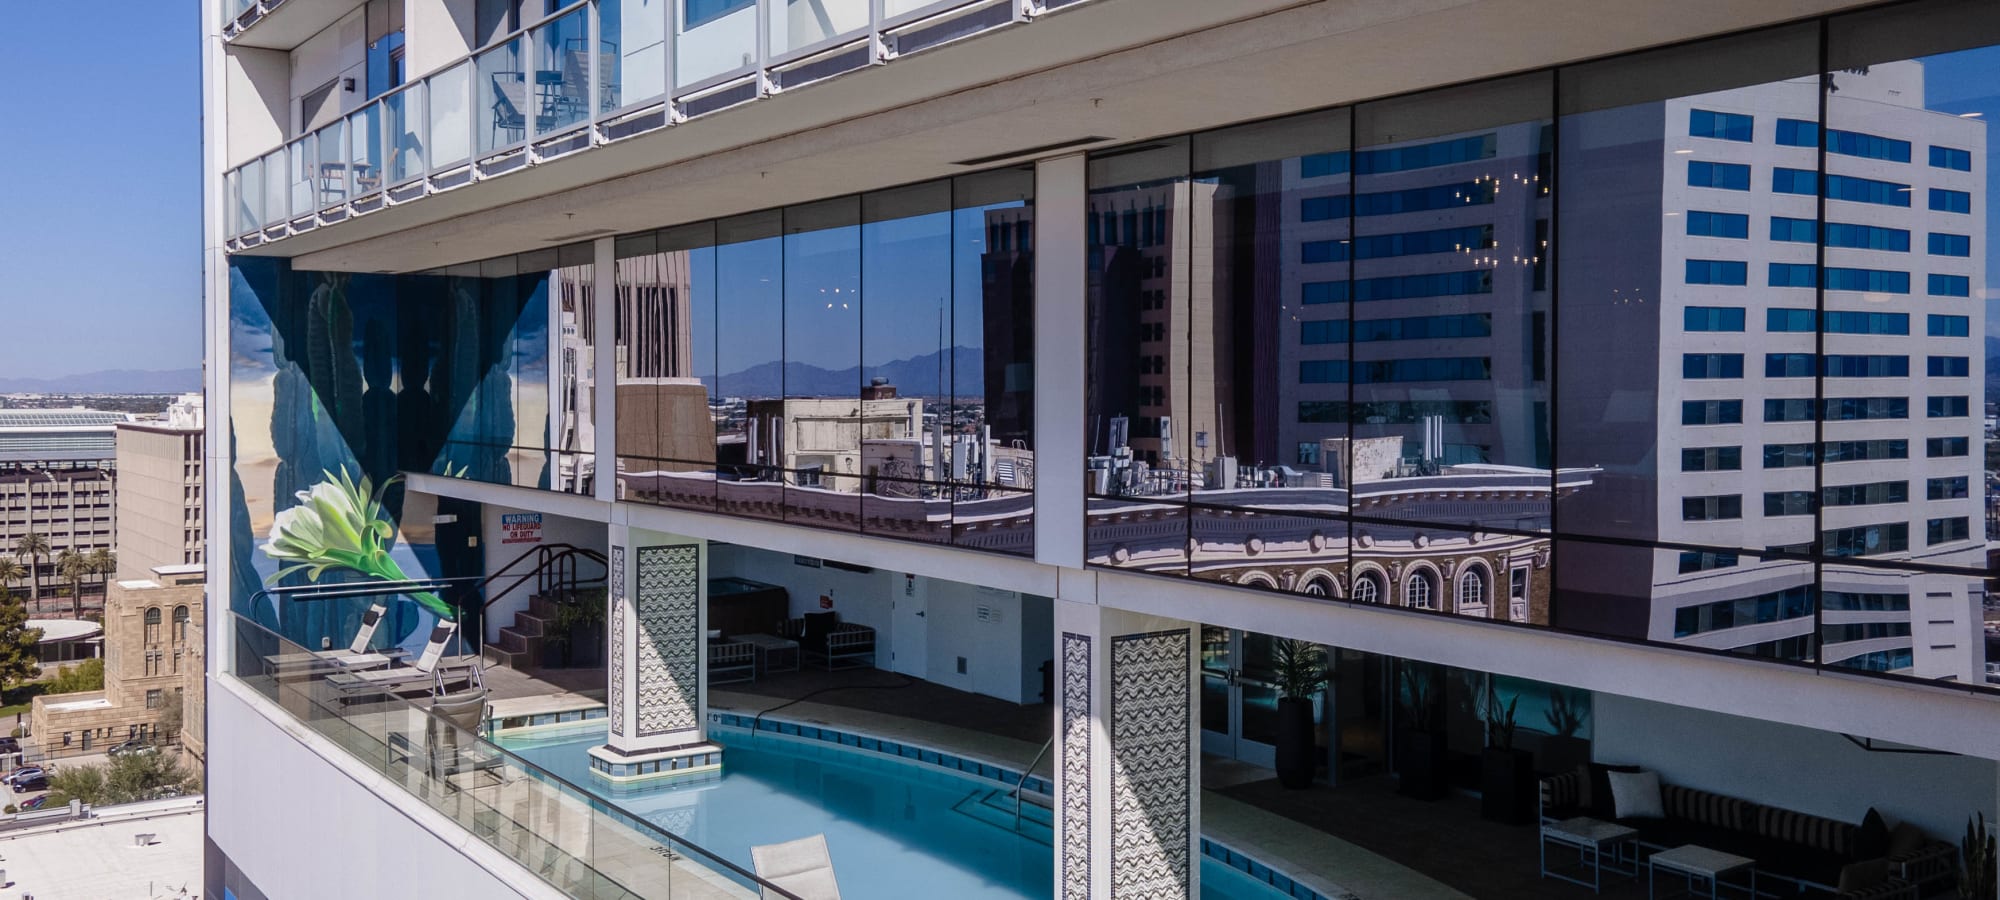 Modern and upscale apartments CityScape Residences in Phoenix, Arizona